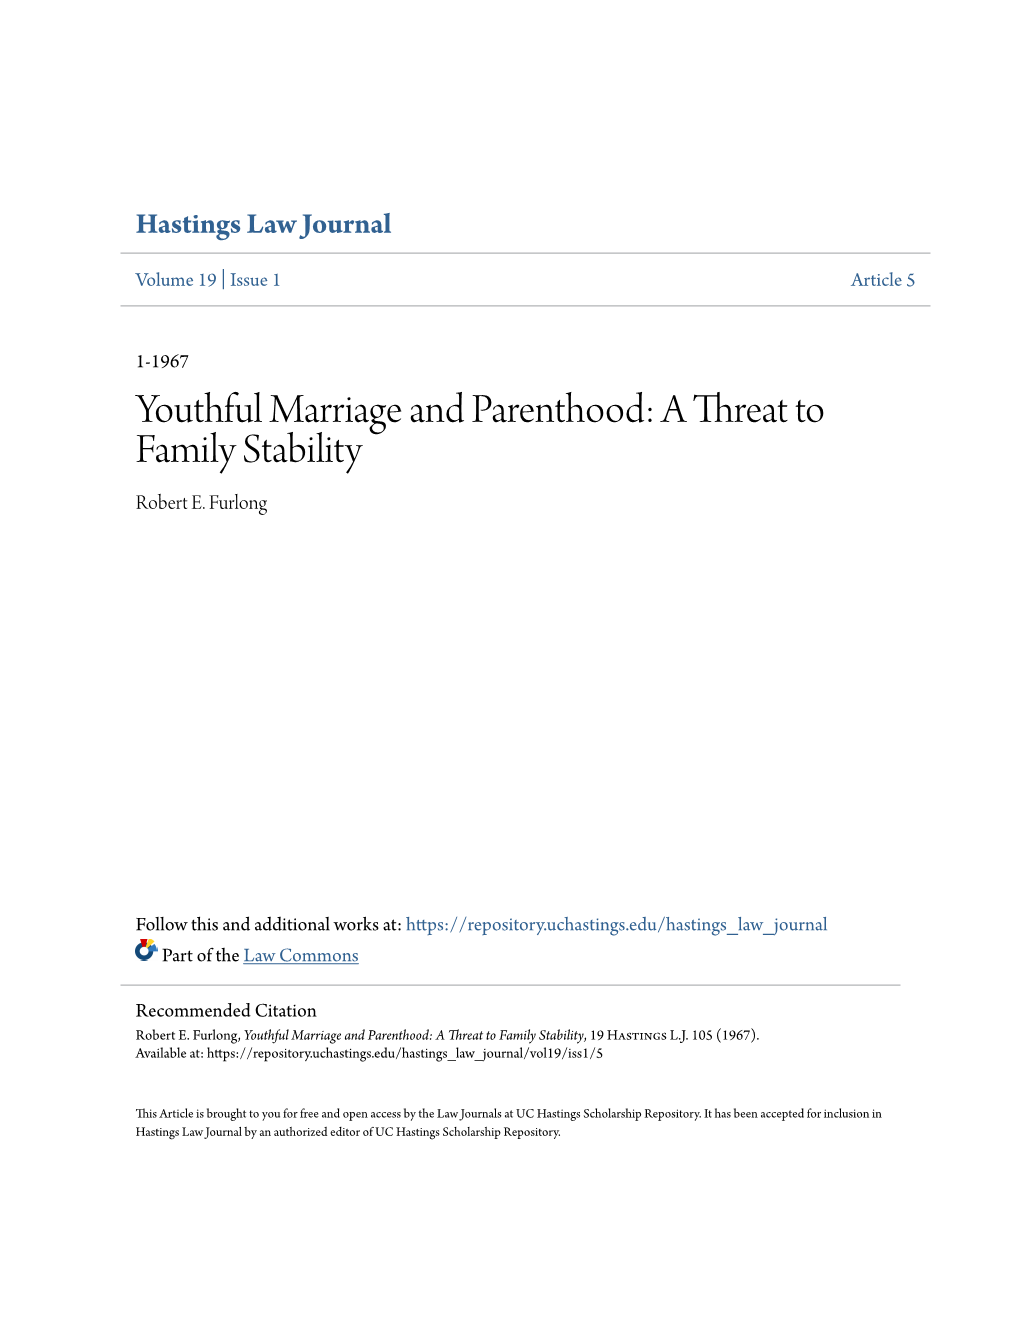 Youthful Marriage and Parenthood: a Threat to Family Stability Robert E